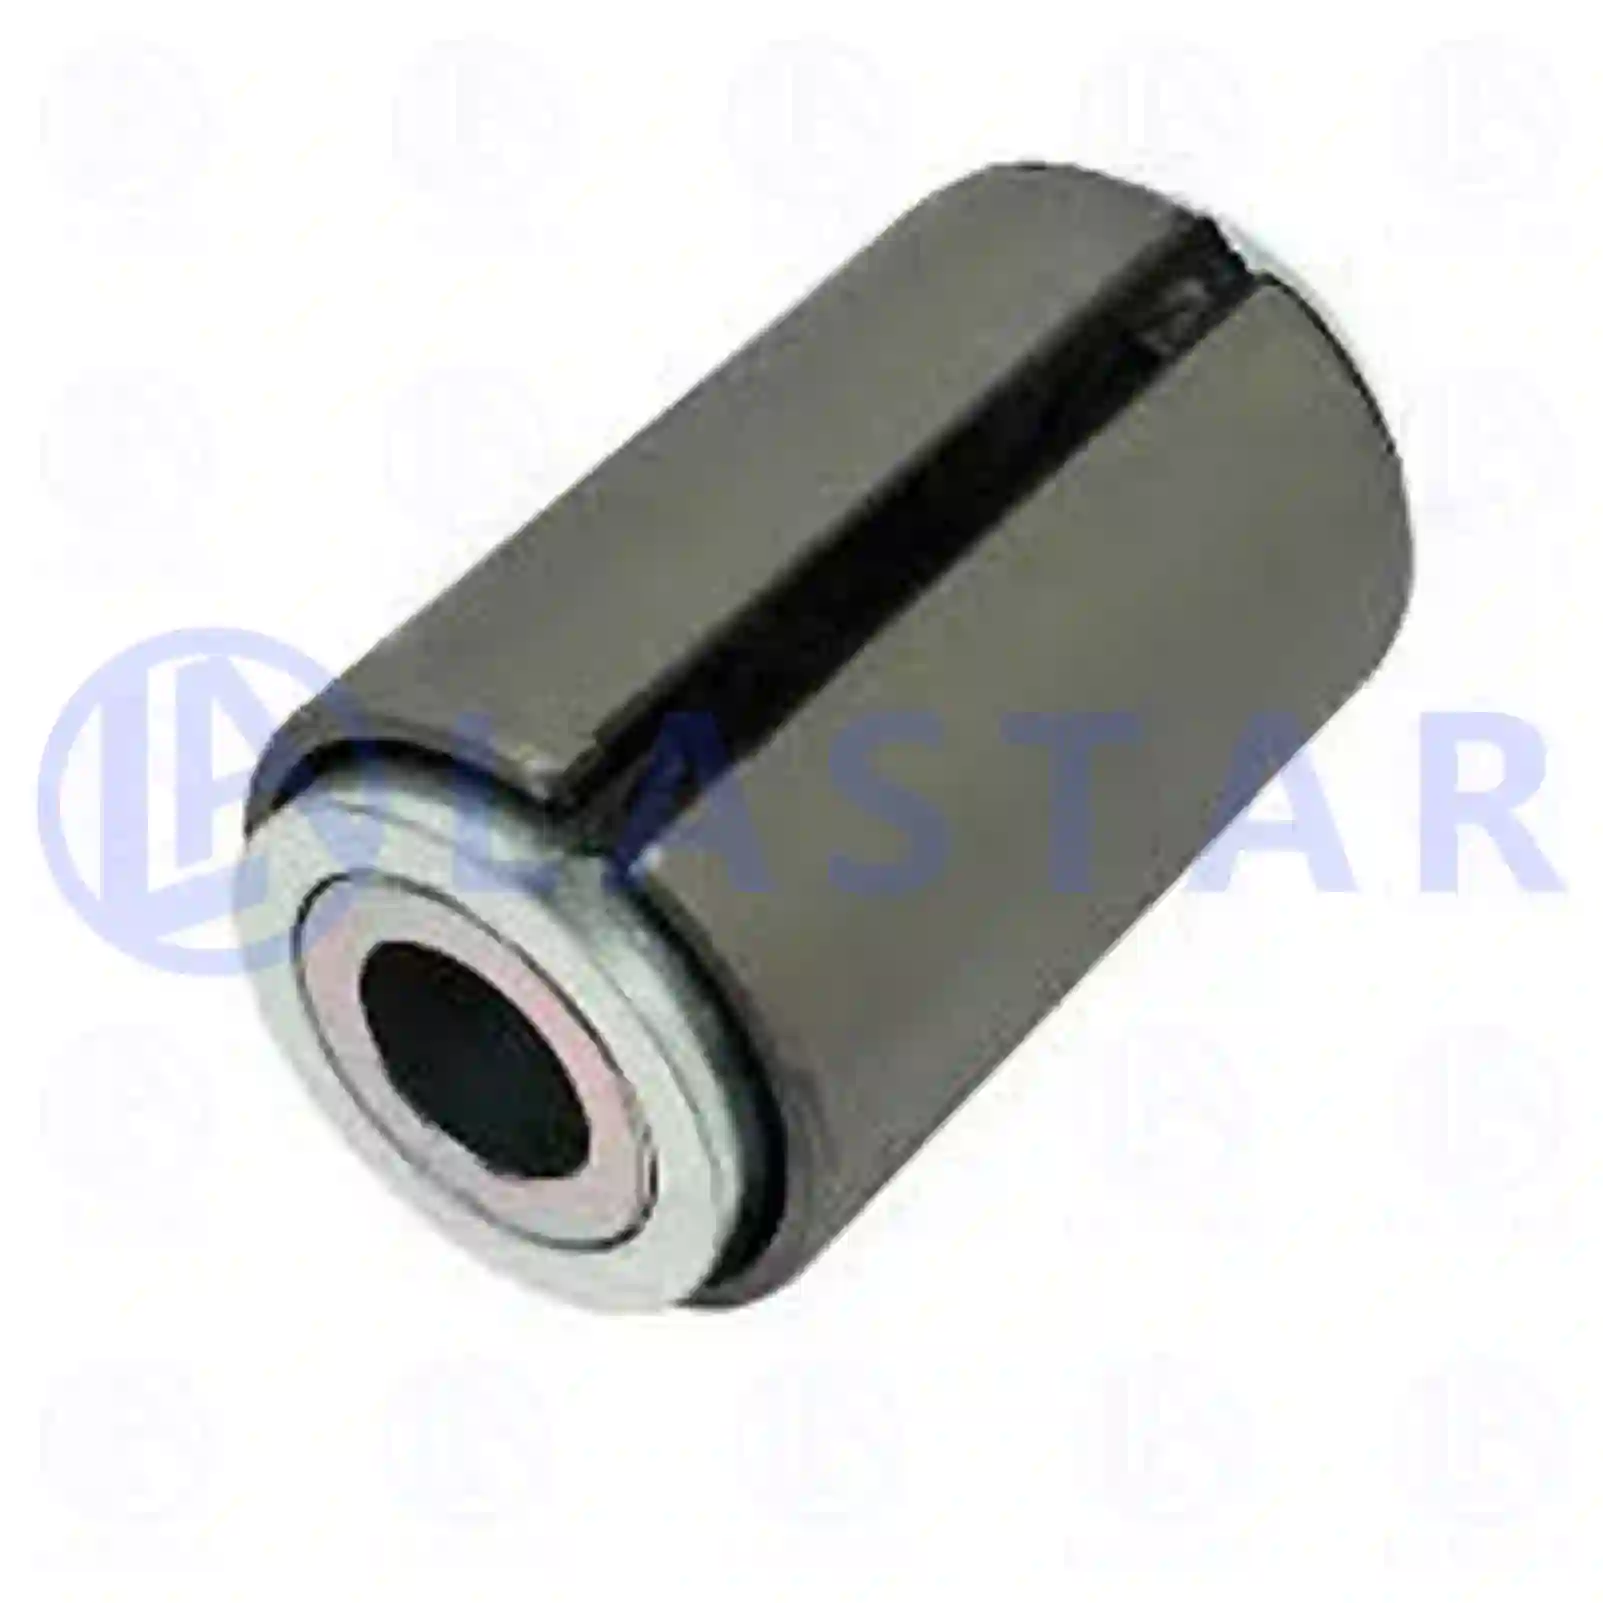 Rubber bushing, 77728313, 9603232885, 9603234085, ||  77728313 Lastar Spare Part | Truck Spare Parts, Auotomotive Spare Parts Rubber bushing, 77728313, 9603232885, 9603234085, ||  77728313 Lastar Spare Part | Truck Spare Parts, Auotomotive Spare Parts